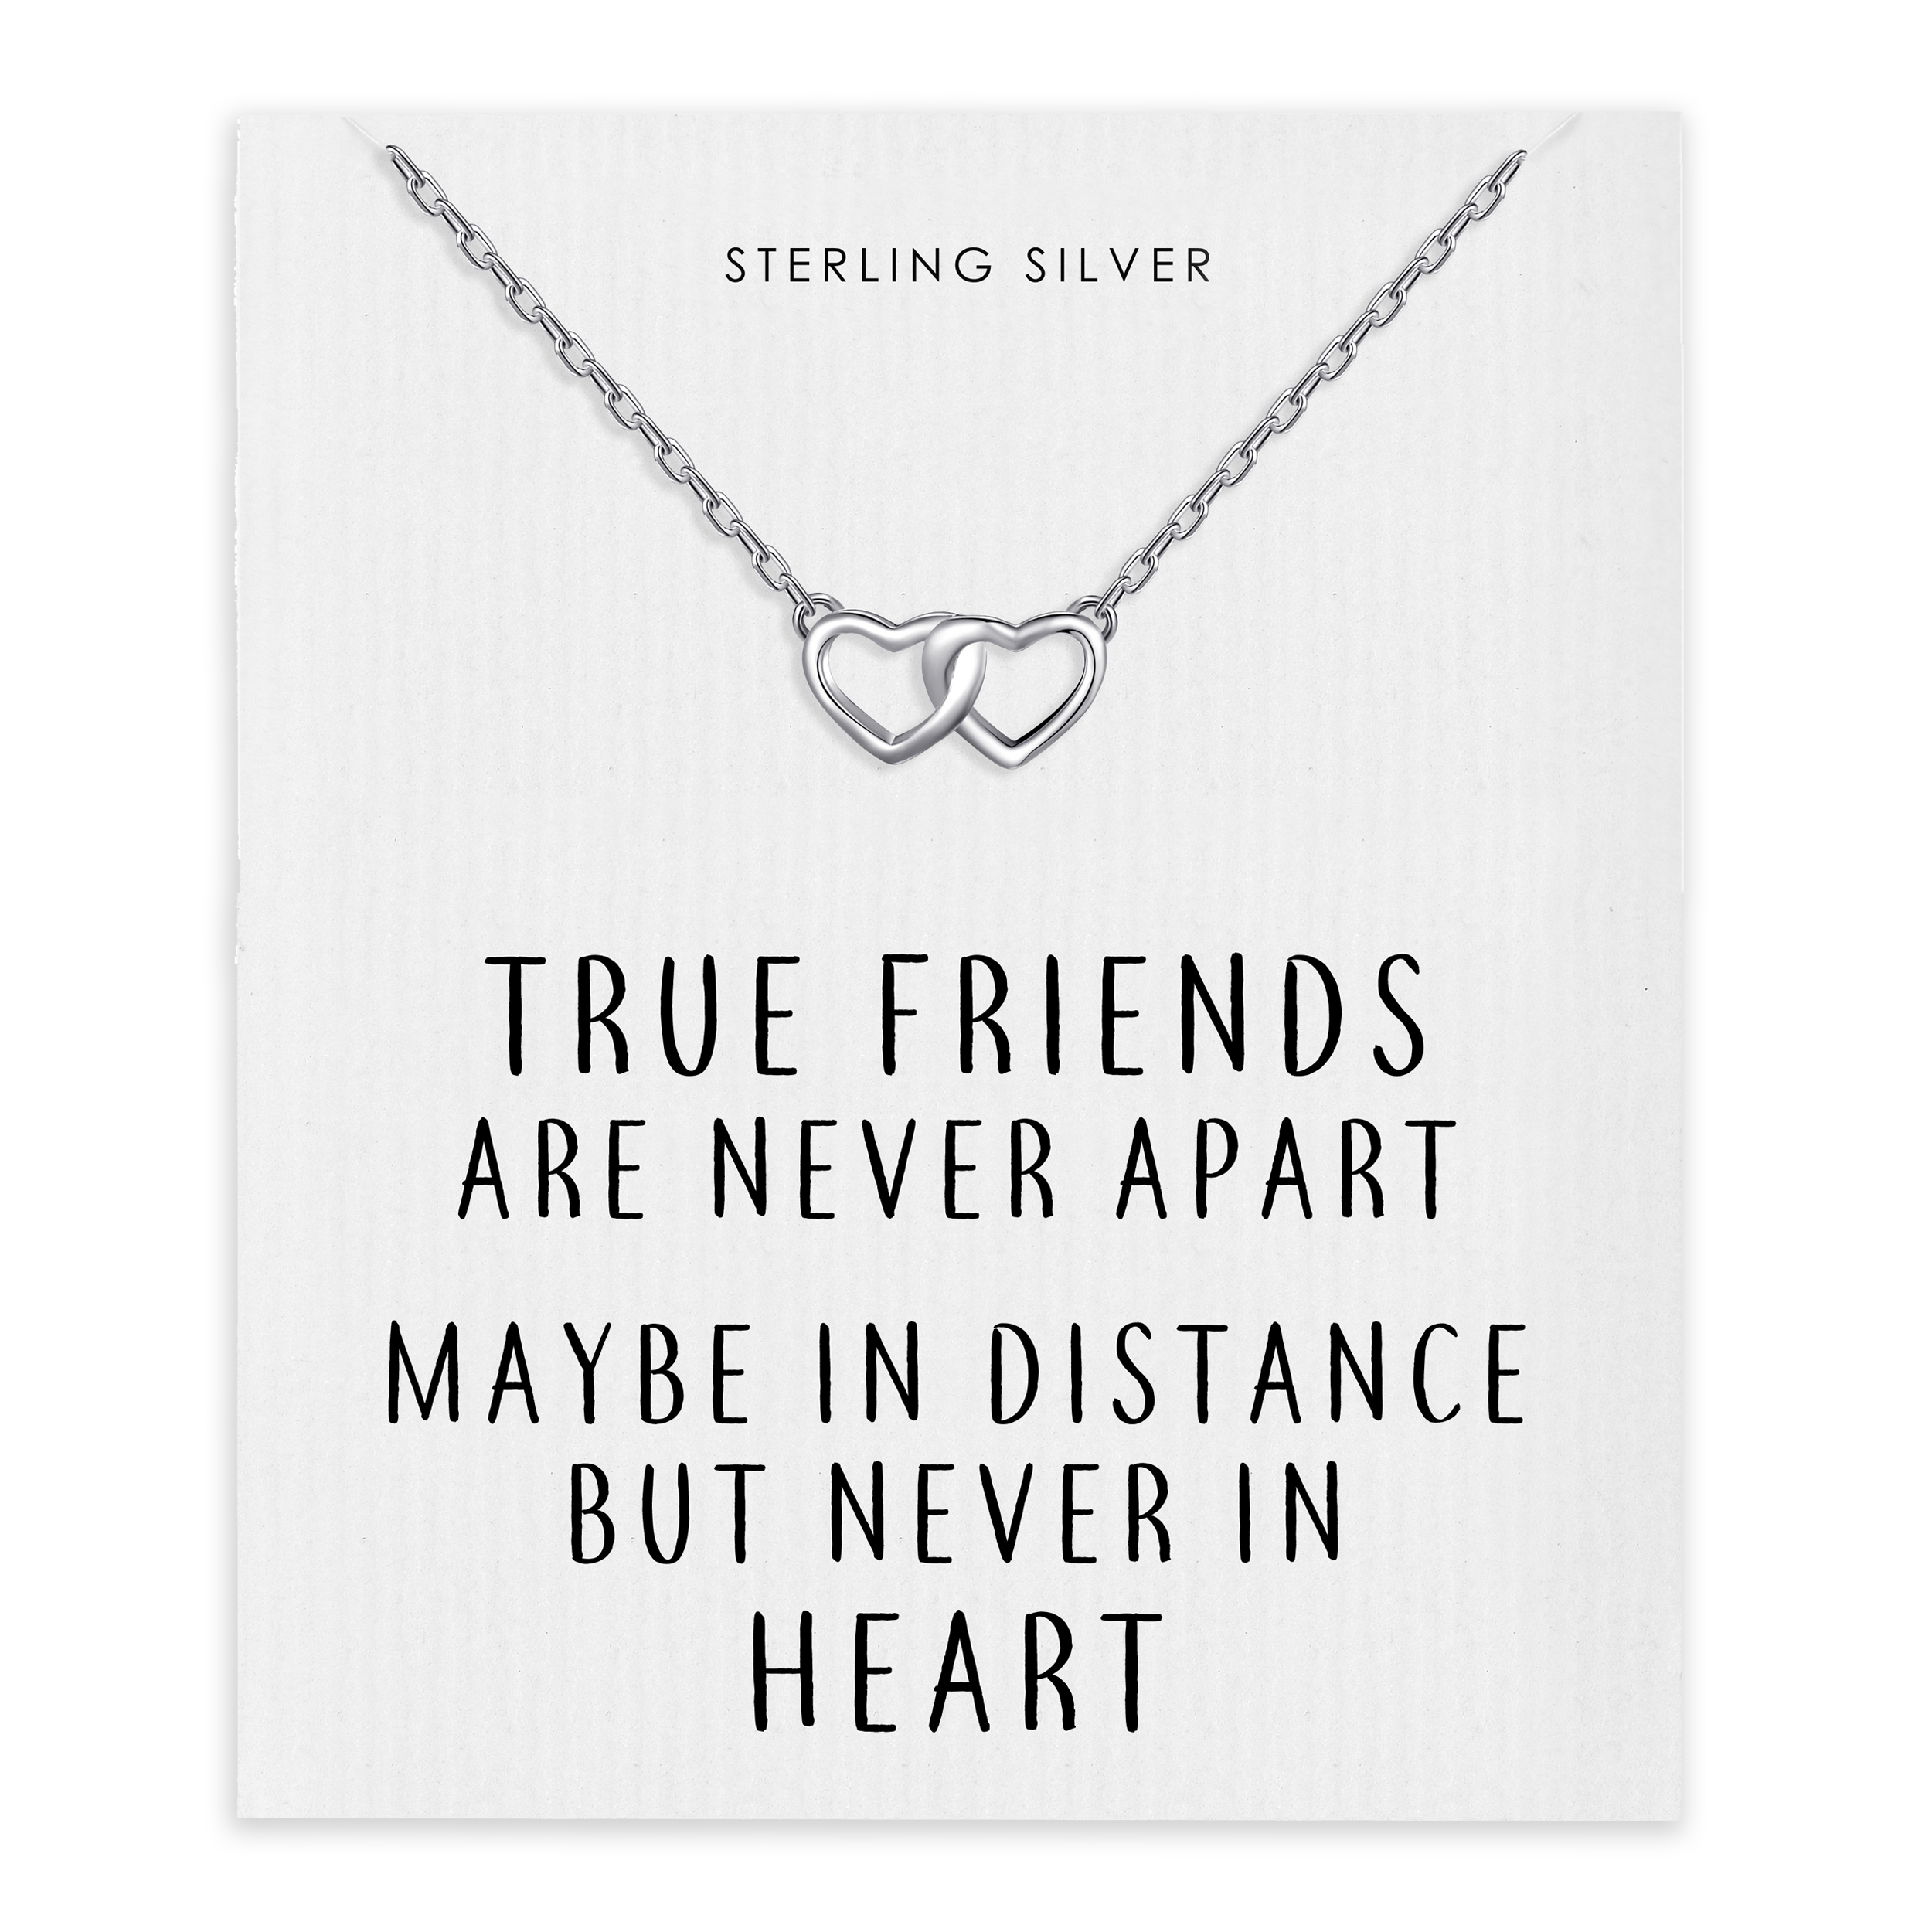 Sterling Silver True Friends Heart Link Necklace with Quote Card by Philip Jones Jewellery